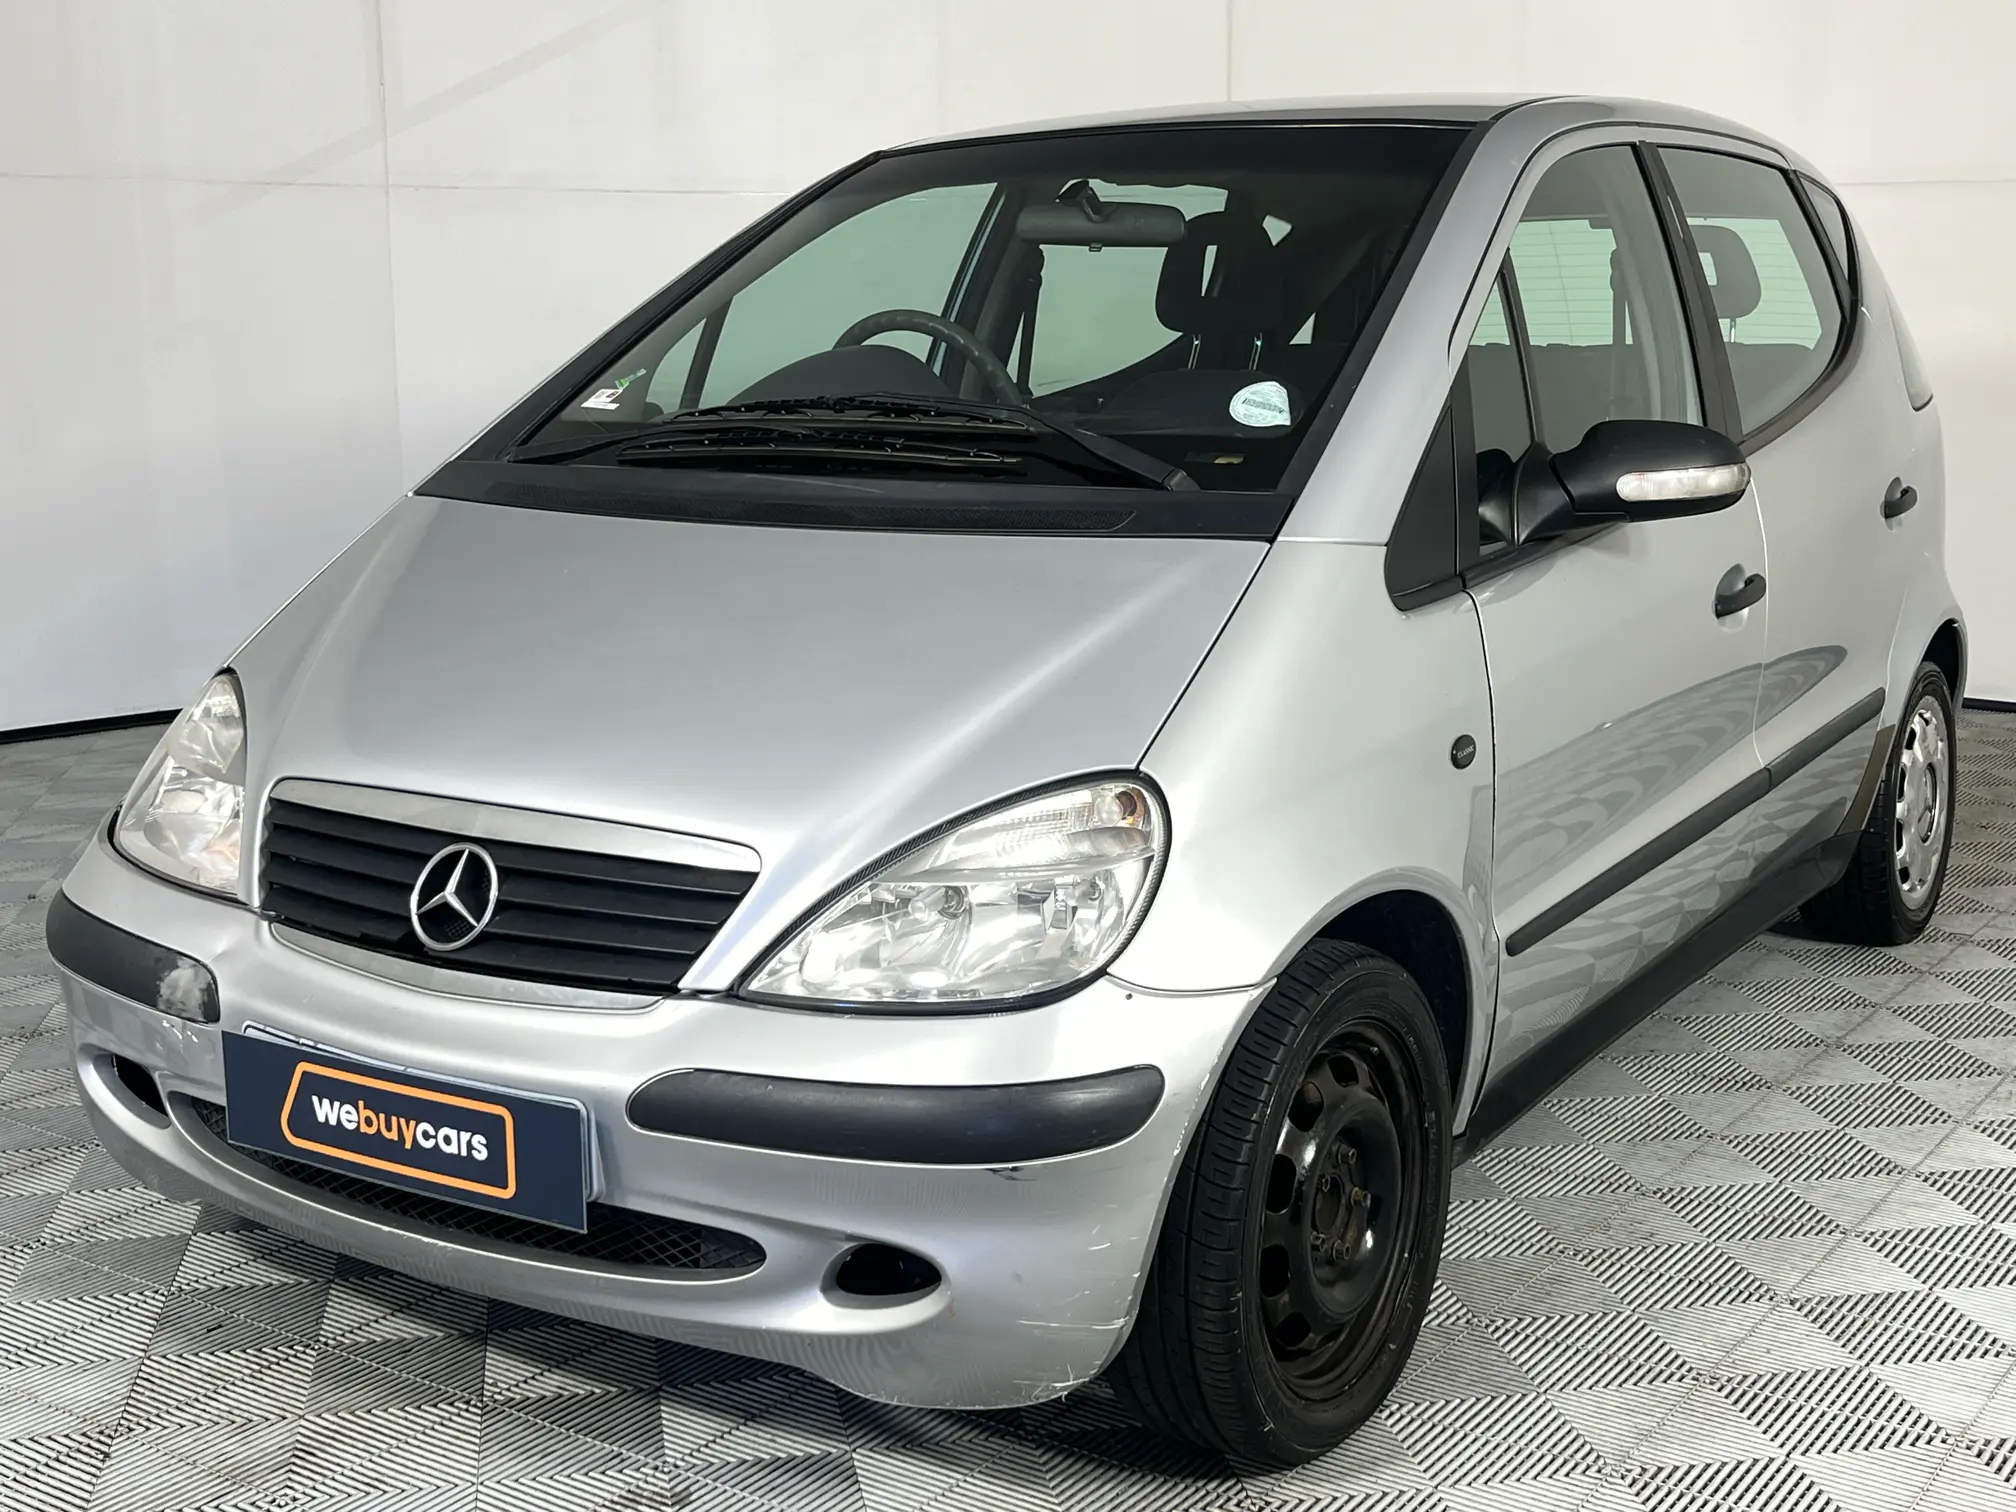 Used 2004 Mercedes Benz A Class A 160l Elegance Auto For Sale Webuycars